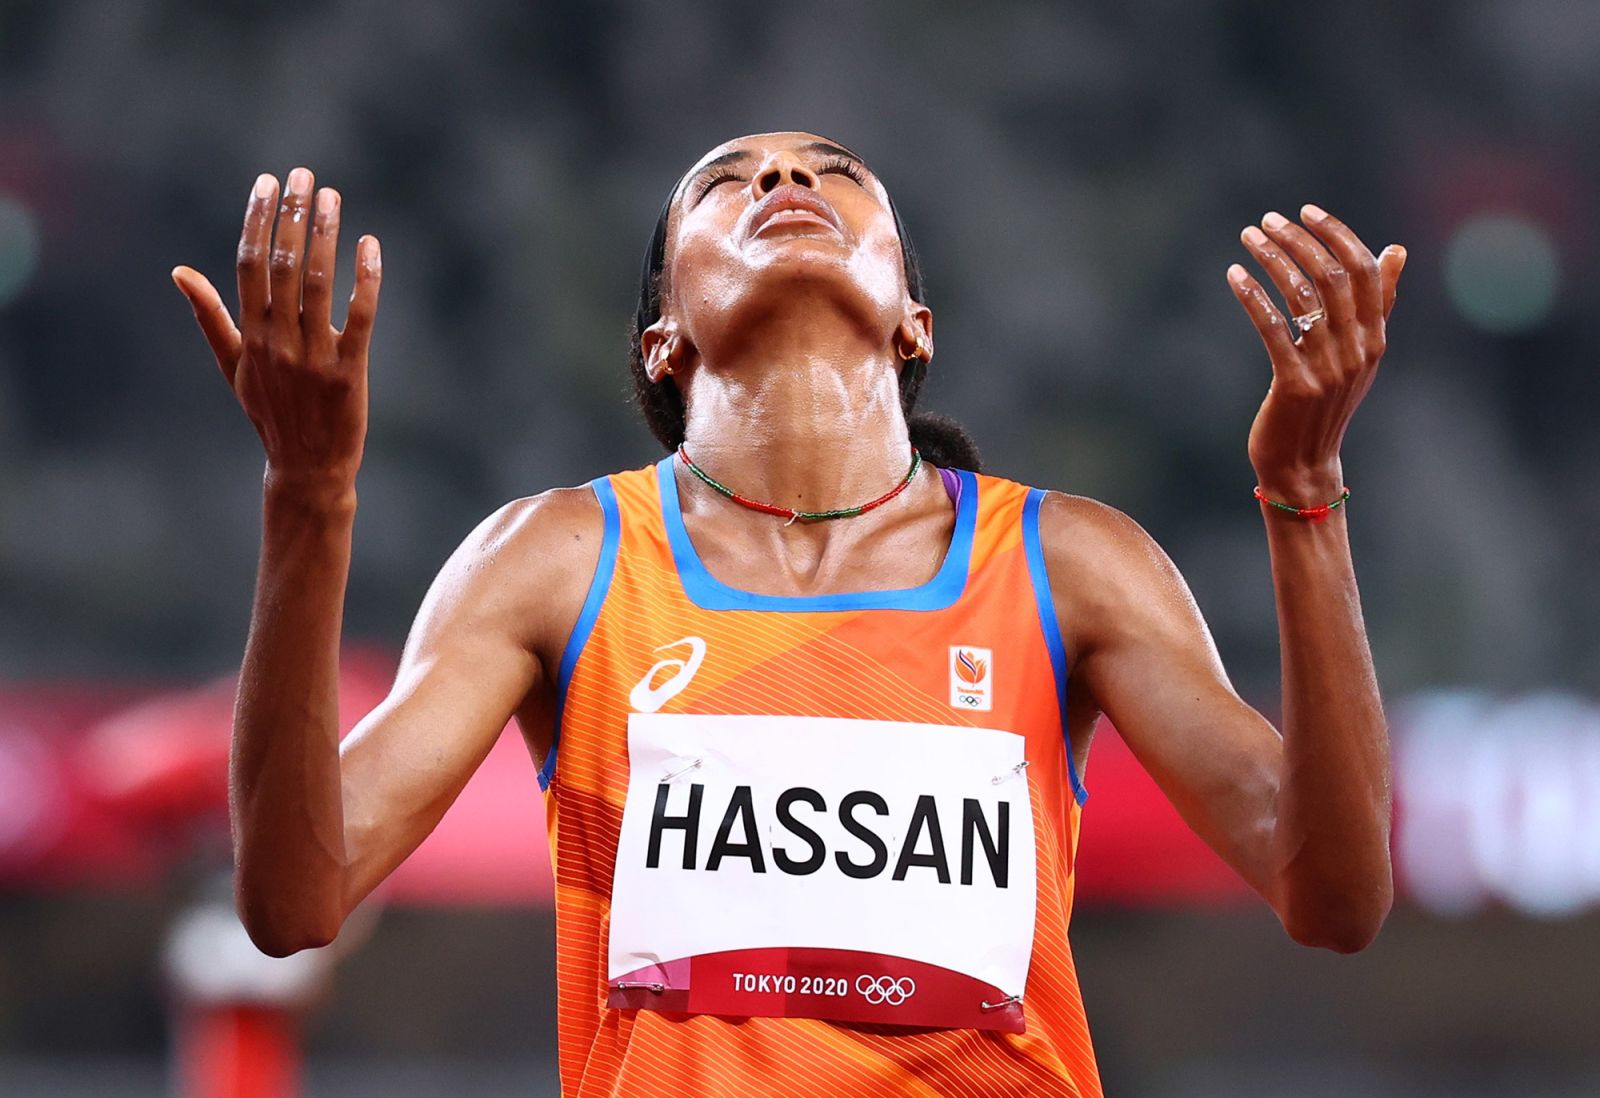 Dutch runner Sifan Hassan celebrates after winning her 1,500 meters on Monday.